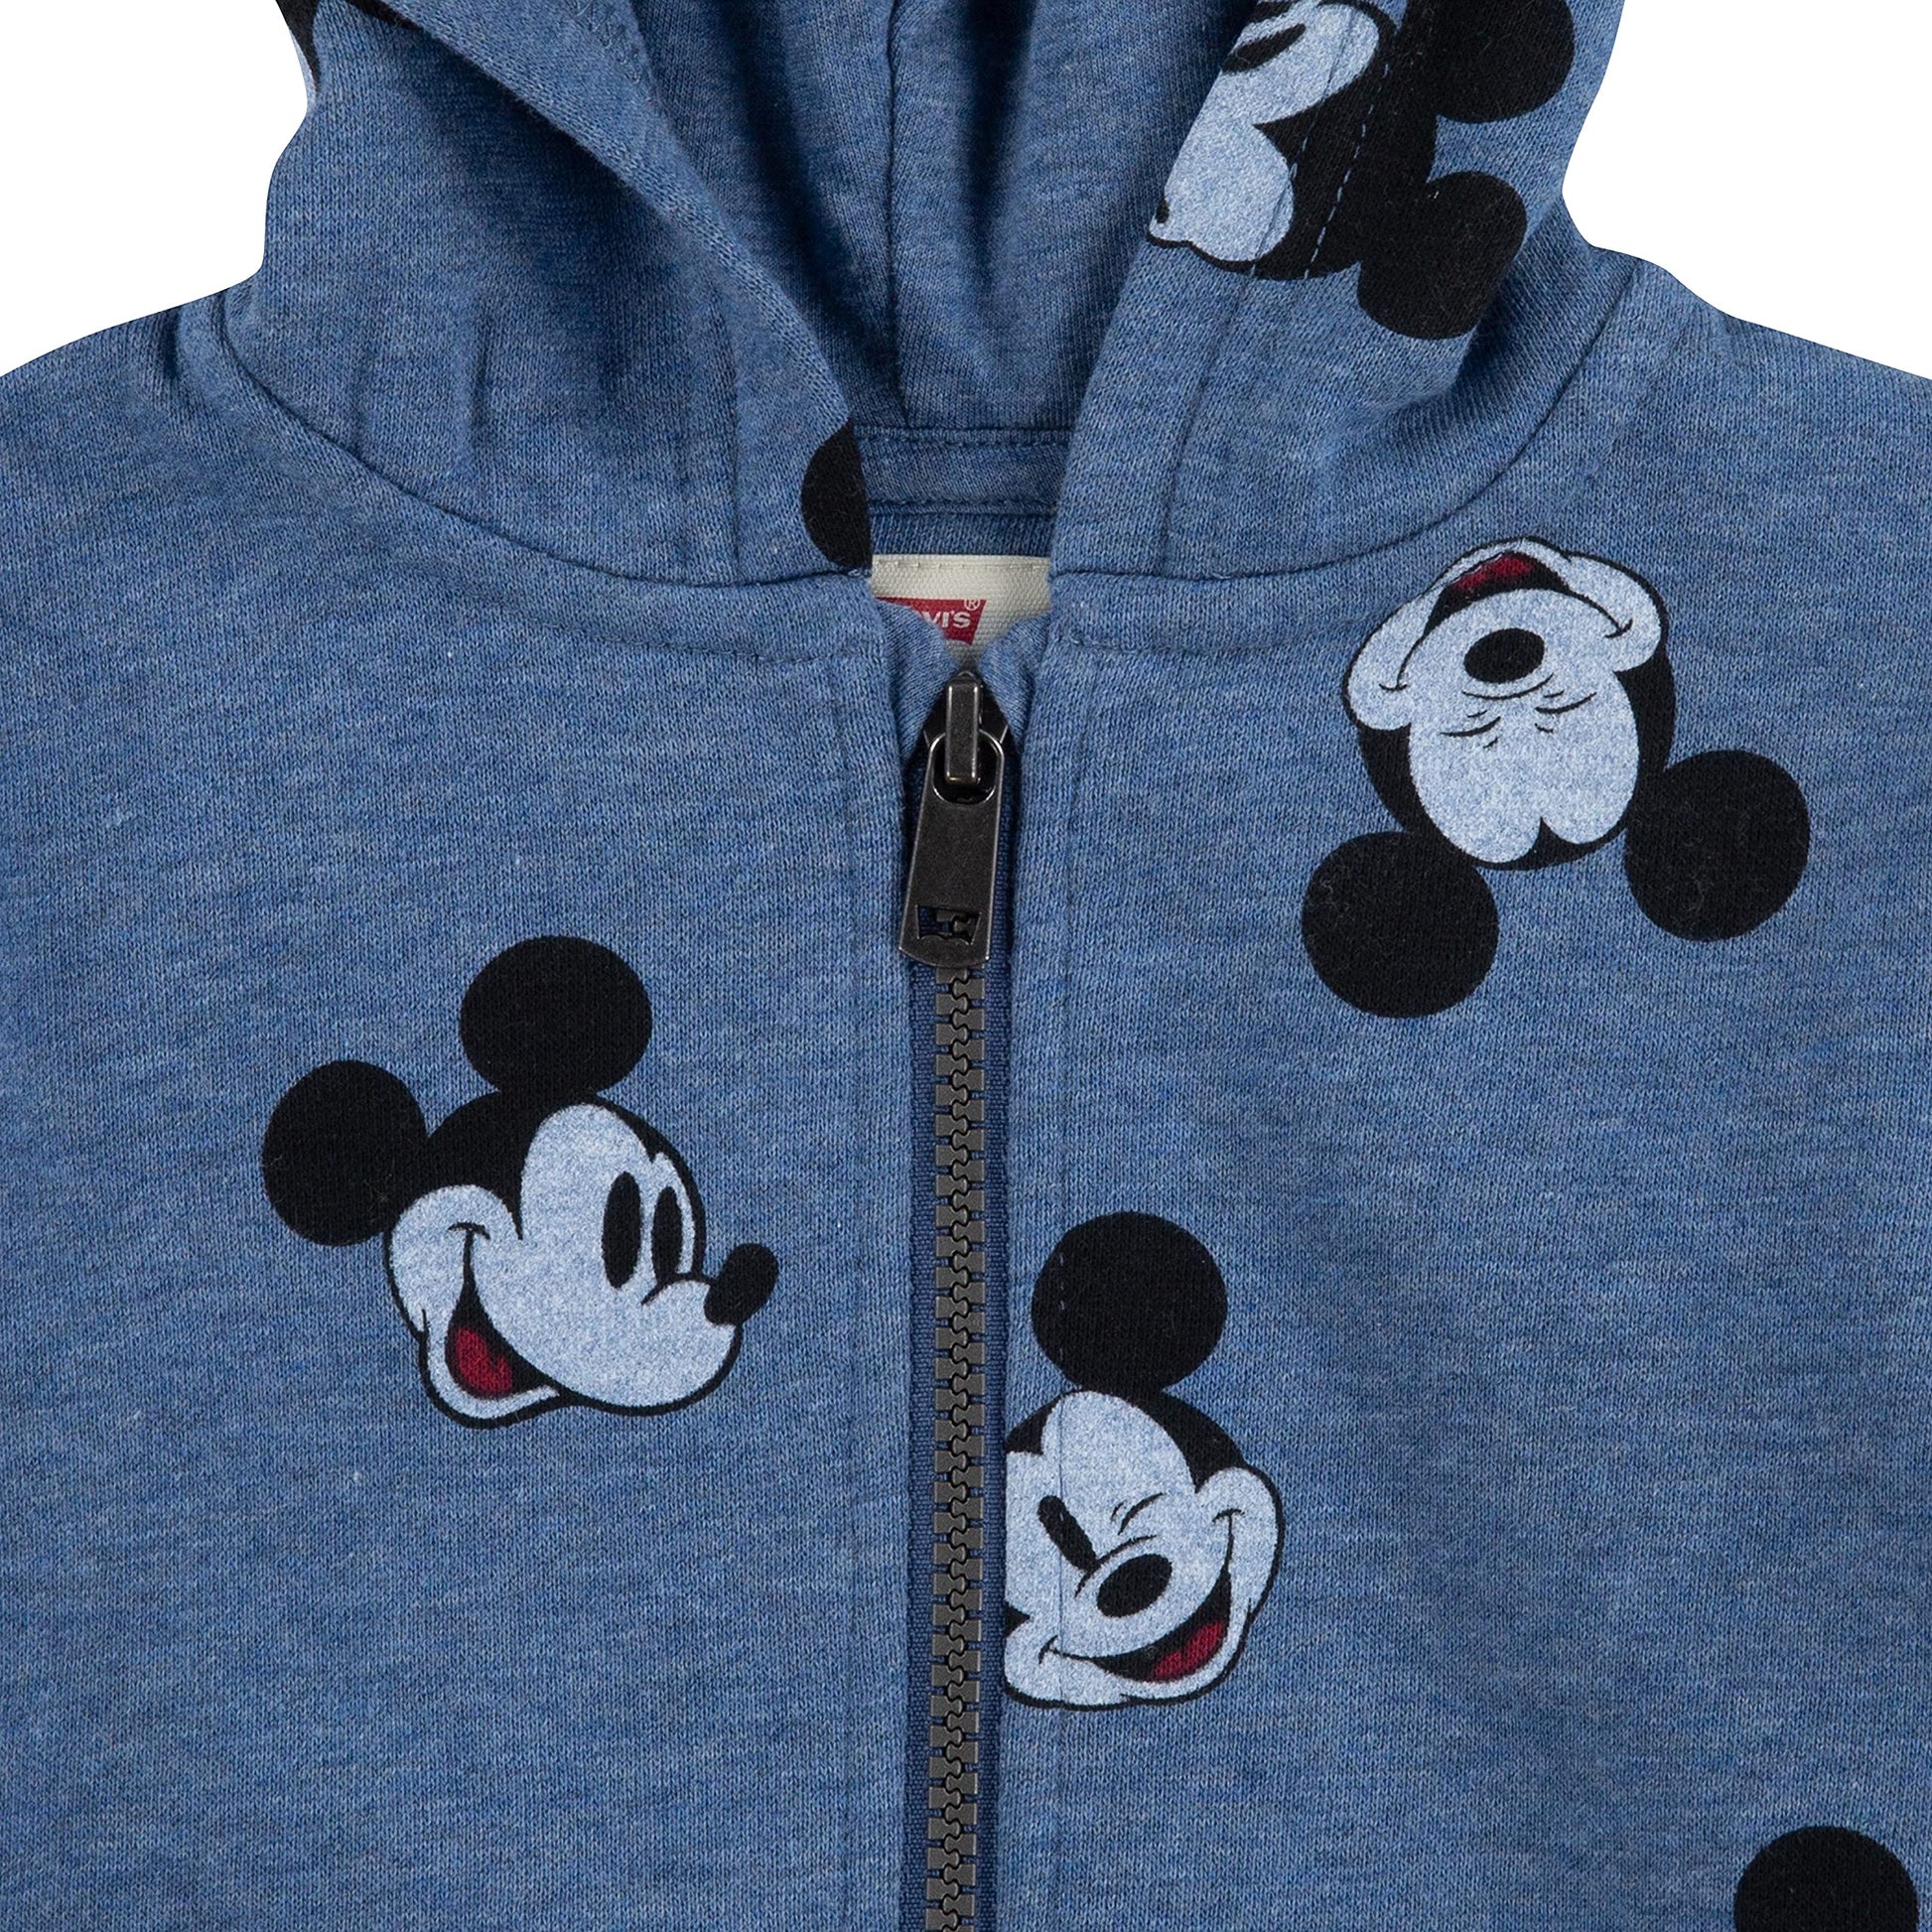 Levi's x Disney Mickey Mouse Hoodie and Joggers Set (Toddler) – Rookie USA